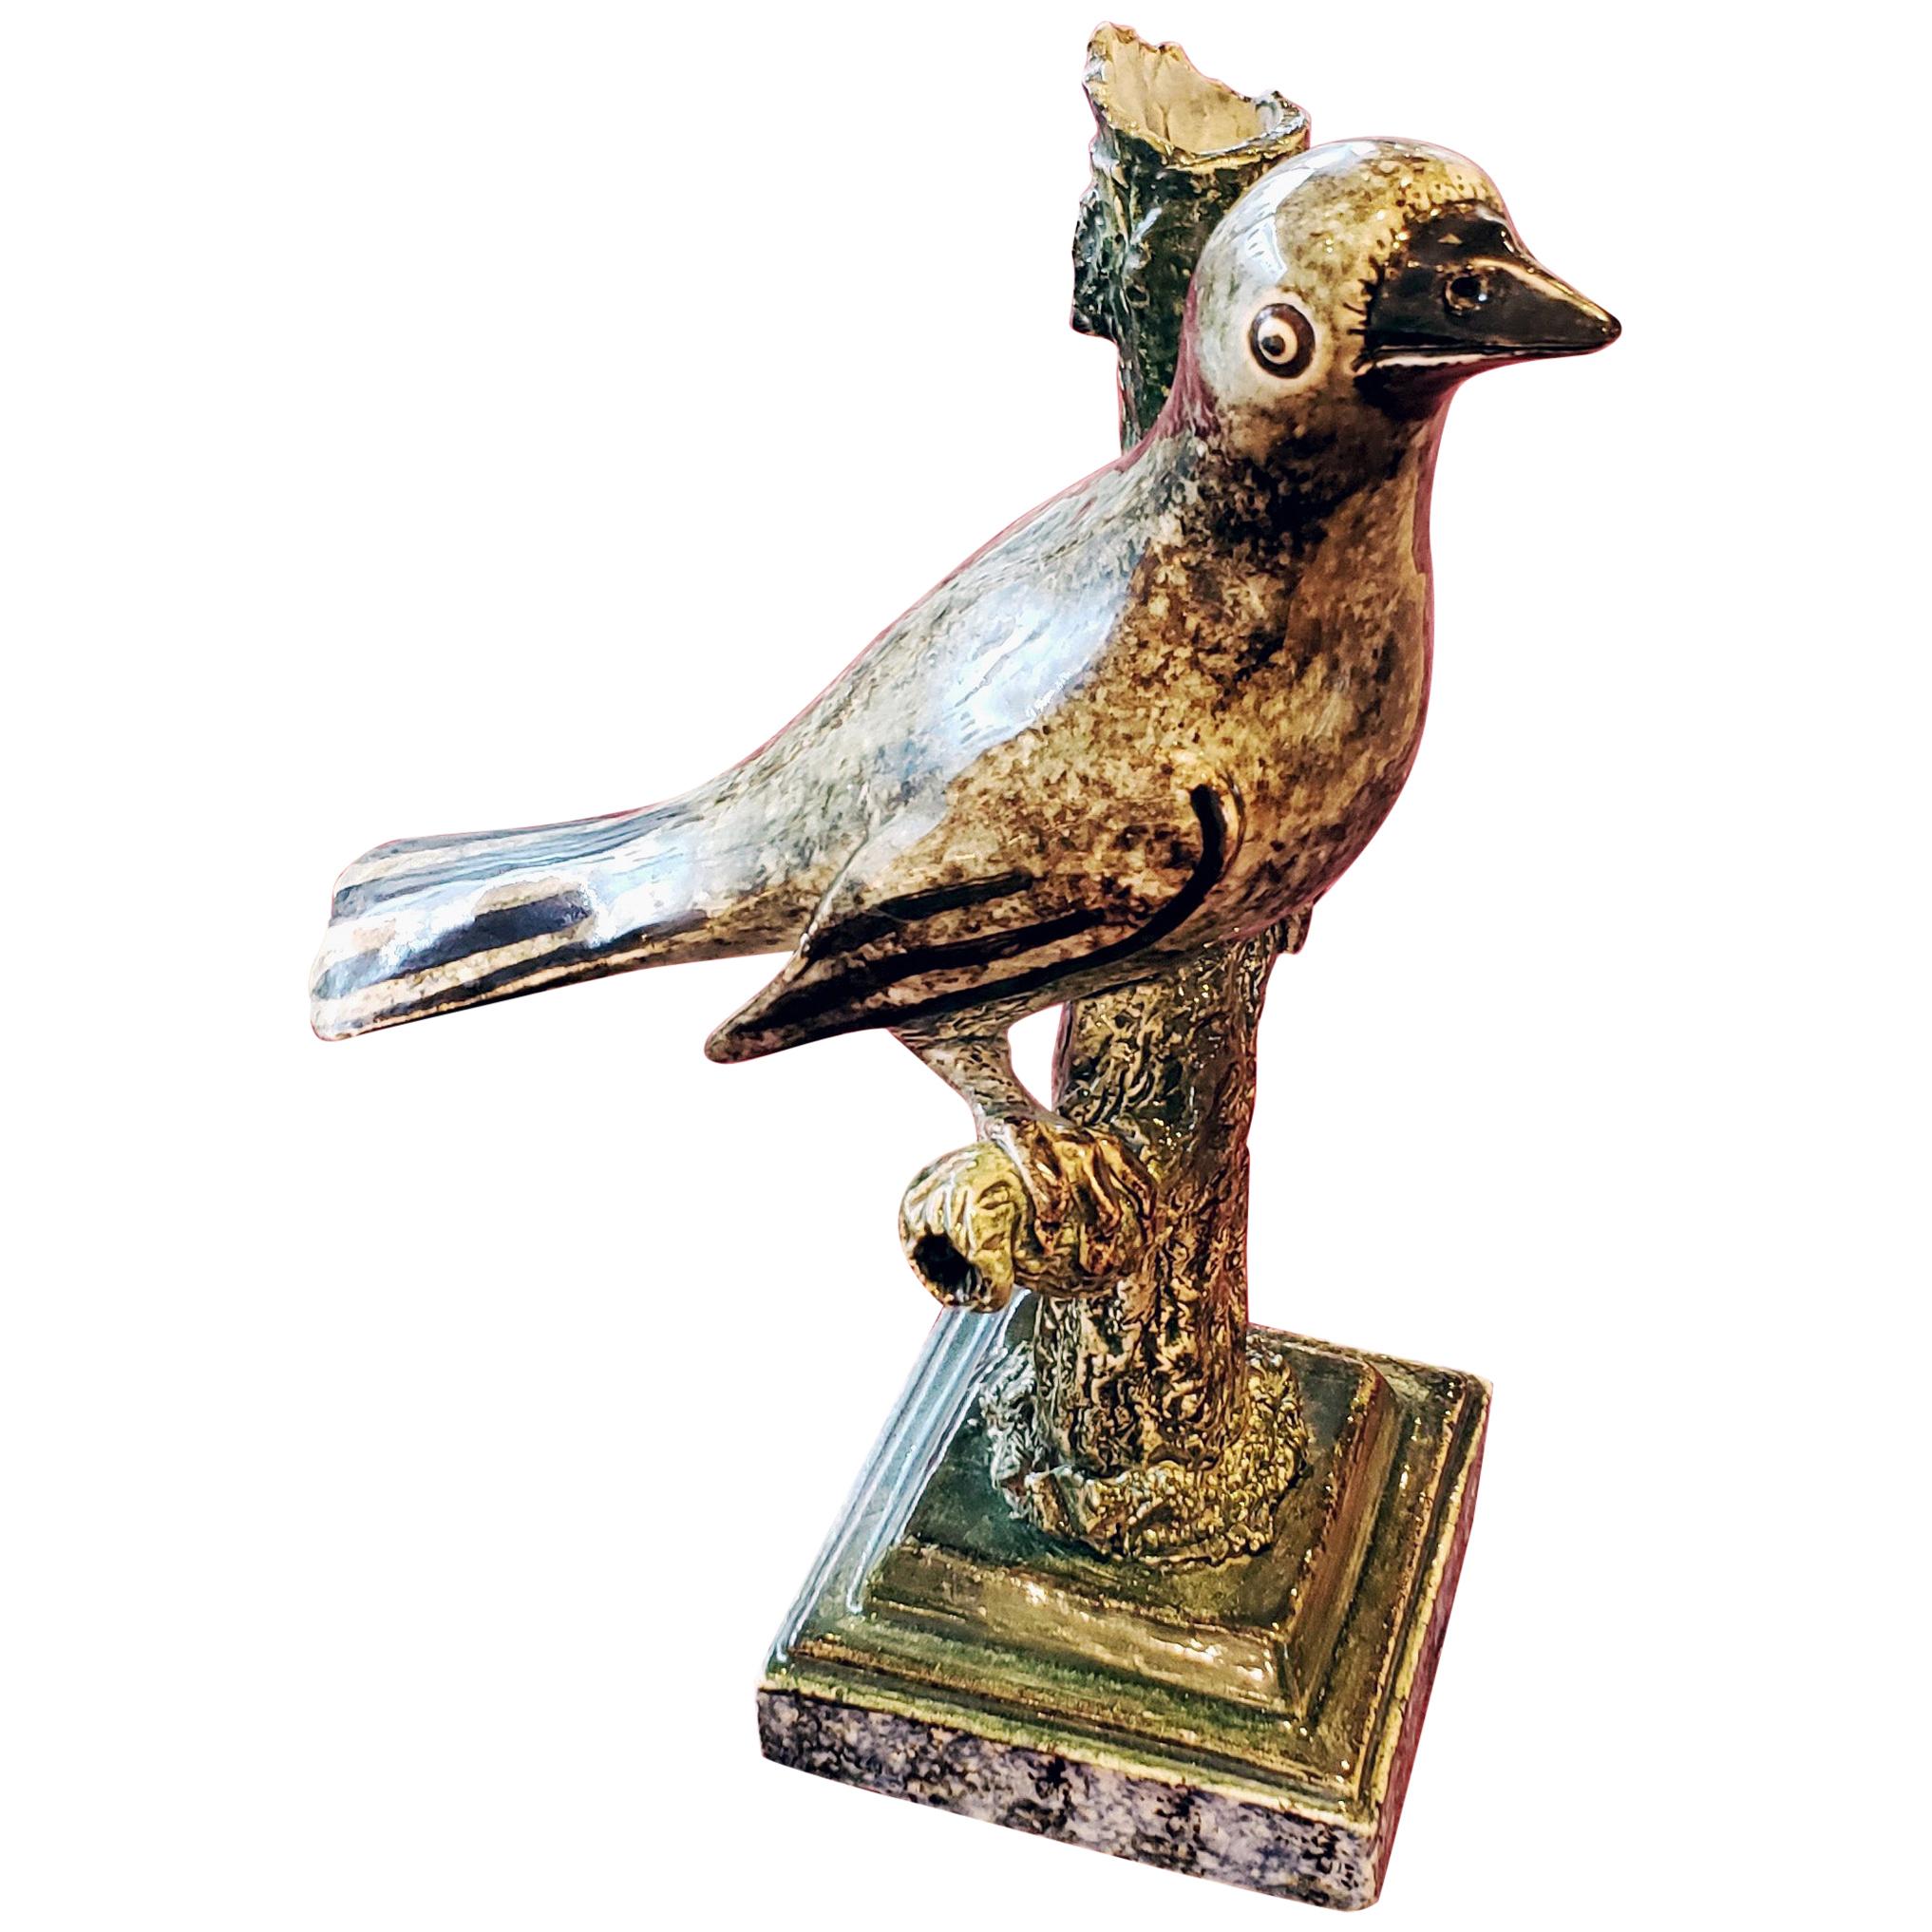 Staffordshire Large Pearlware Whistle Modeled as a Bird on Tree Branch, 1810